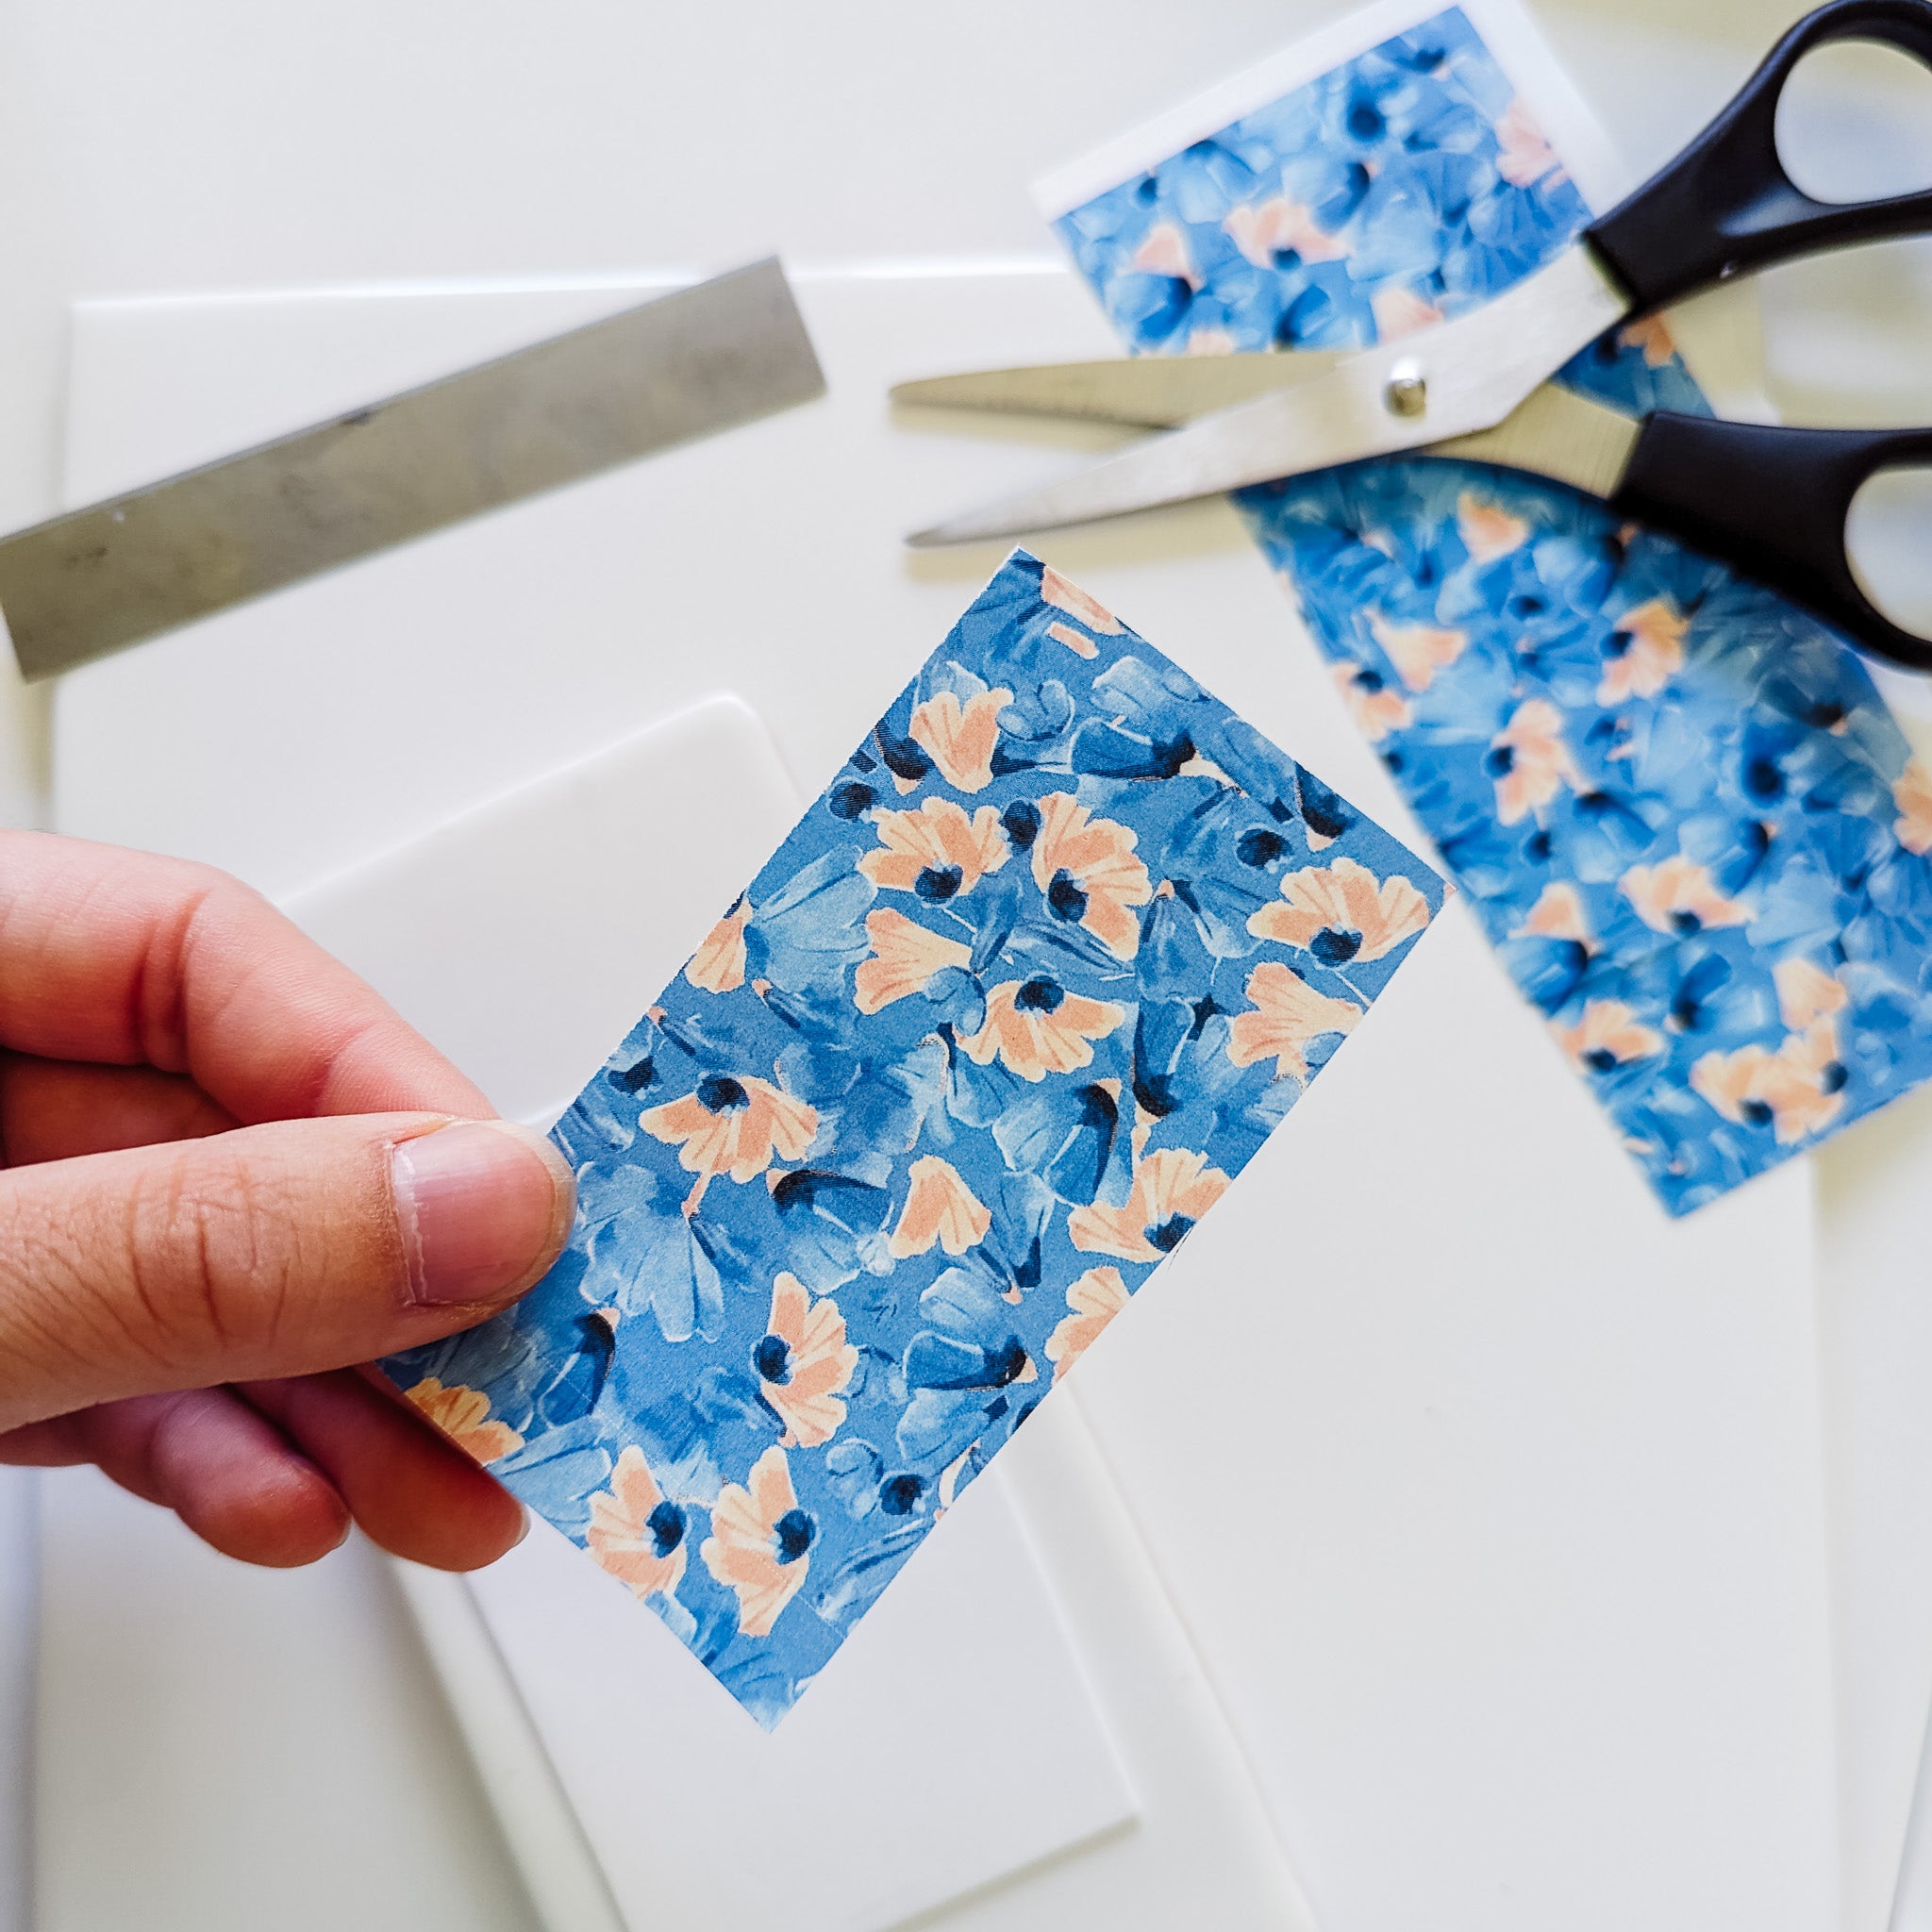 How to use Polymer Clay Transfer Paper